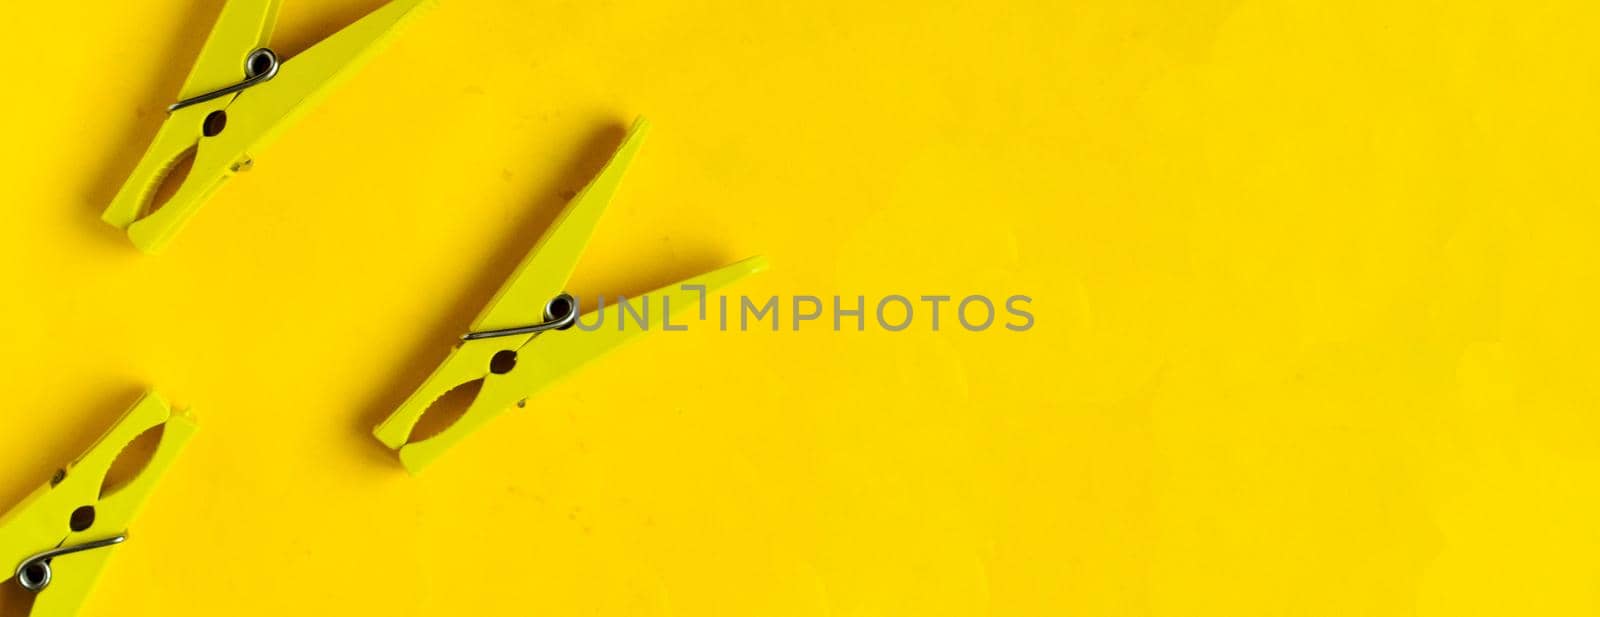 Top view, yellow clothespins on a yellow background, copyspace.